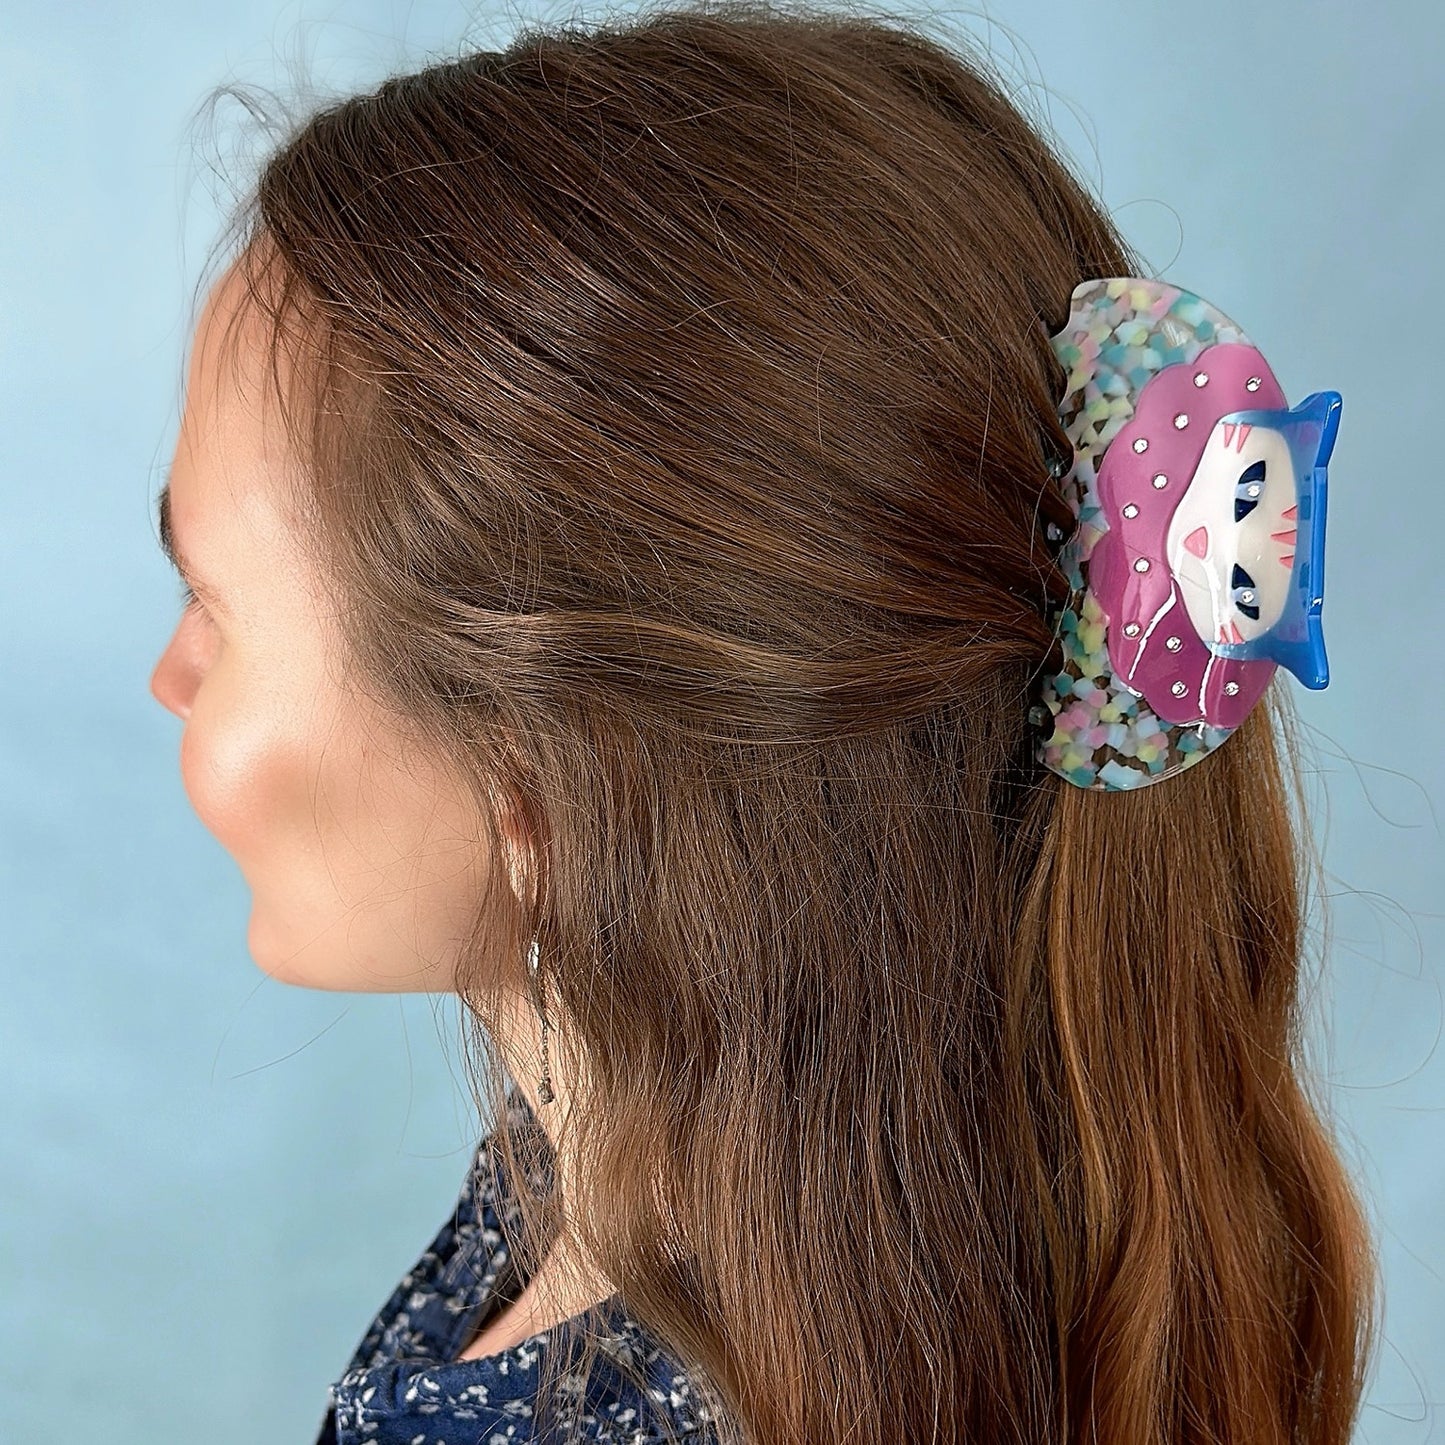 Confetti cat clown hair claw with pink and blue acetate on model hairstyle